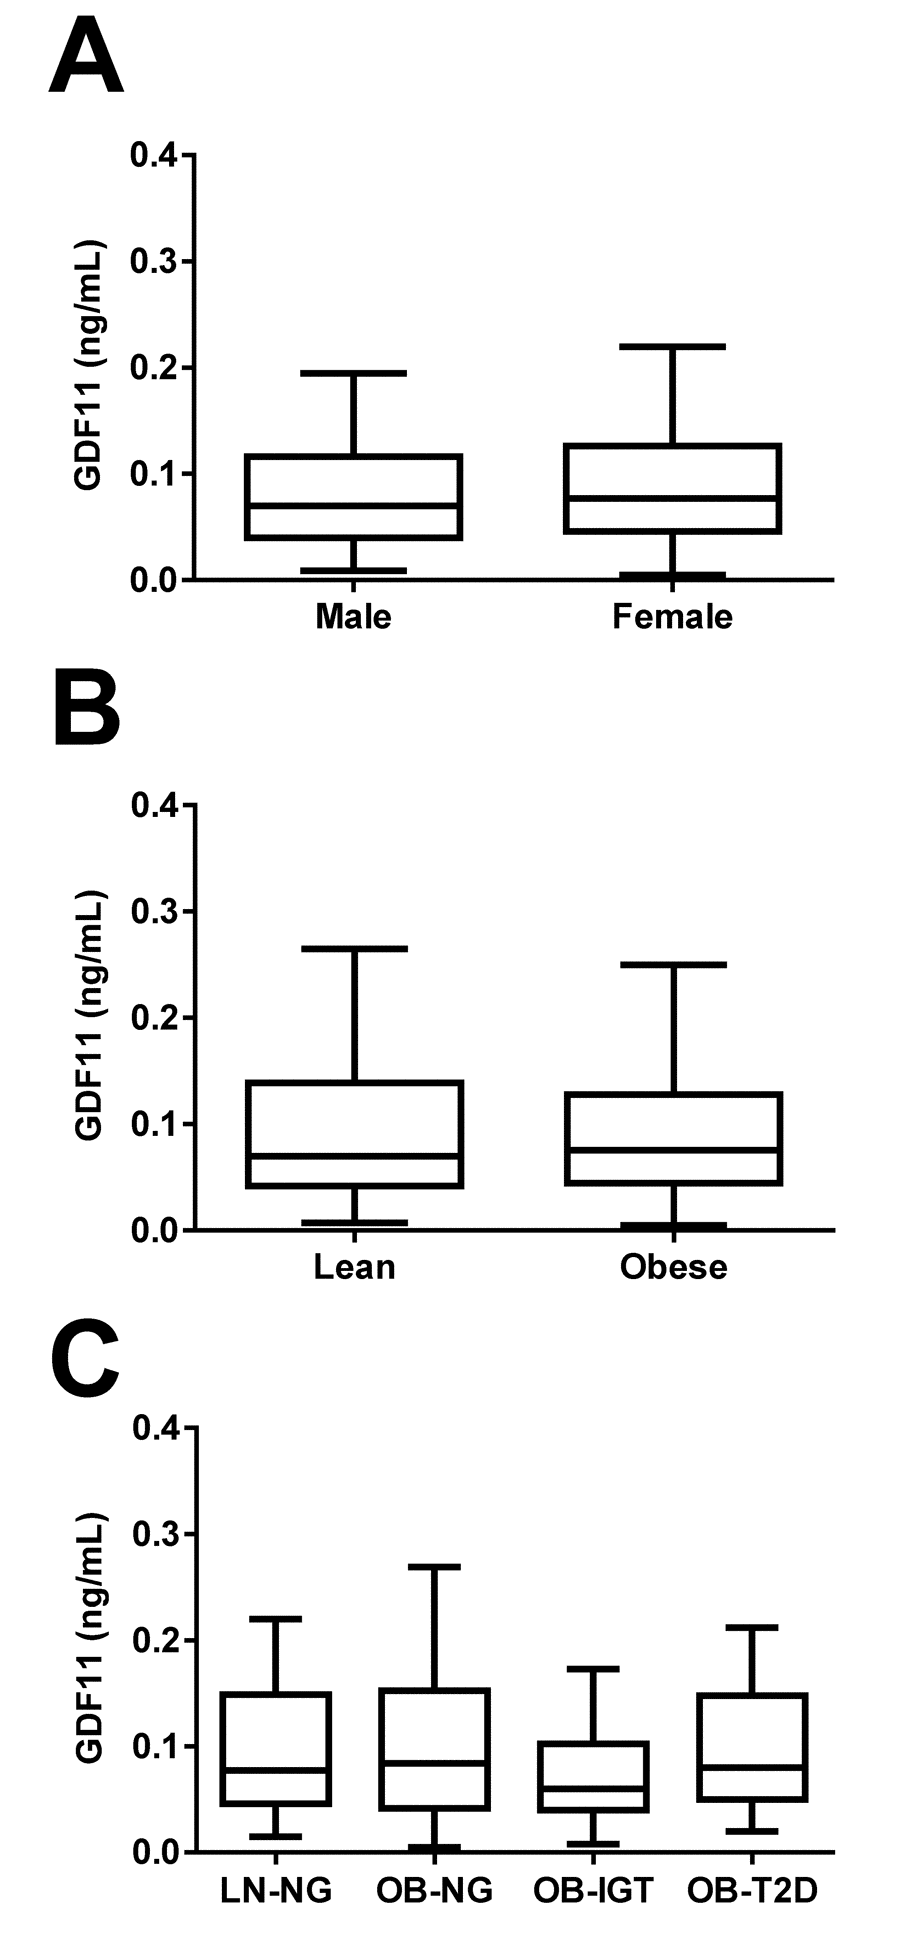 Effect of gender, obesity and type 2 diabetes on GDF11 levels. (A) Comparison of serum GDF11 concentrations between males (n=126) and females (n=193). Statistical difference was analyzed by two-tailed unpaired Student’s t test. (B) Comparison of serum GDF11 concentrations between lean (n=49) and obese (n=228) individuals. Statistical difference was analyzed by two-tailed unpaired Student’s t test. (C) Serum GDF11 concentrations in the lean normoglycemic (LN-NG, n=40), obese normoglycemic (OB-NG, n=93), obese with impaired glucose tolerance (OB-IGT, n=46), and obese with type 2 diabetes (OB-T2D, n=47) groups of the whole sample. Statistical differences between groups were analyzed by one-way ANOVA. For the three figures, box represents interquartile range and median inside, with whiskers plotted according to the Tukey method.